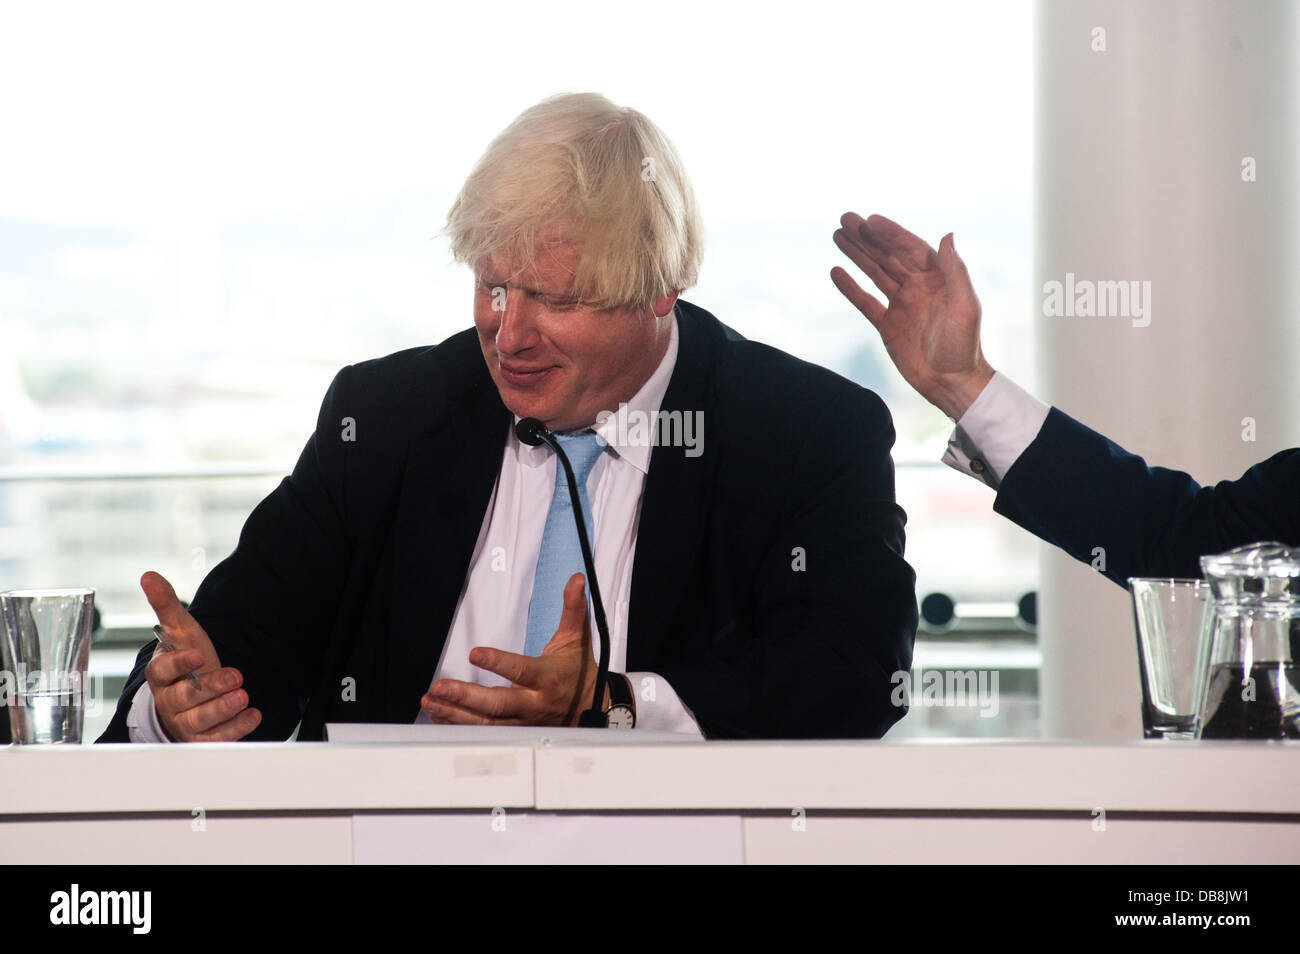 London, UK - 25 July 2013: Minister for Sport and Tourism, Rt Hon Hugh Robertson (R) pats Mayor of London, Boris Johnson (L) on the shoulder during the press conference Credit:  Piero Cruciatti/Alamy Live News Stock Photo